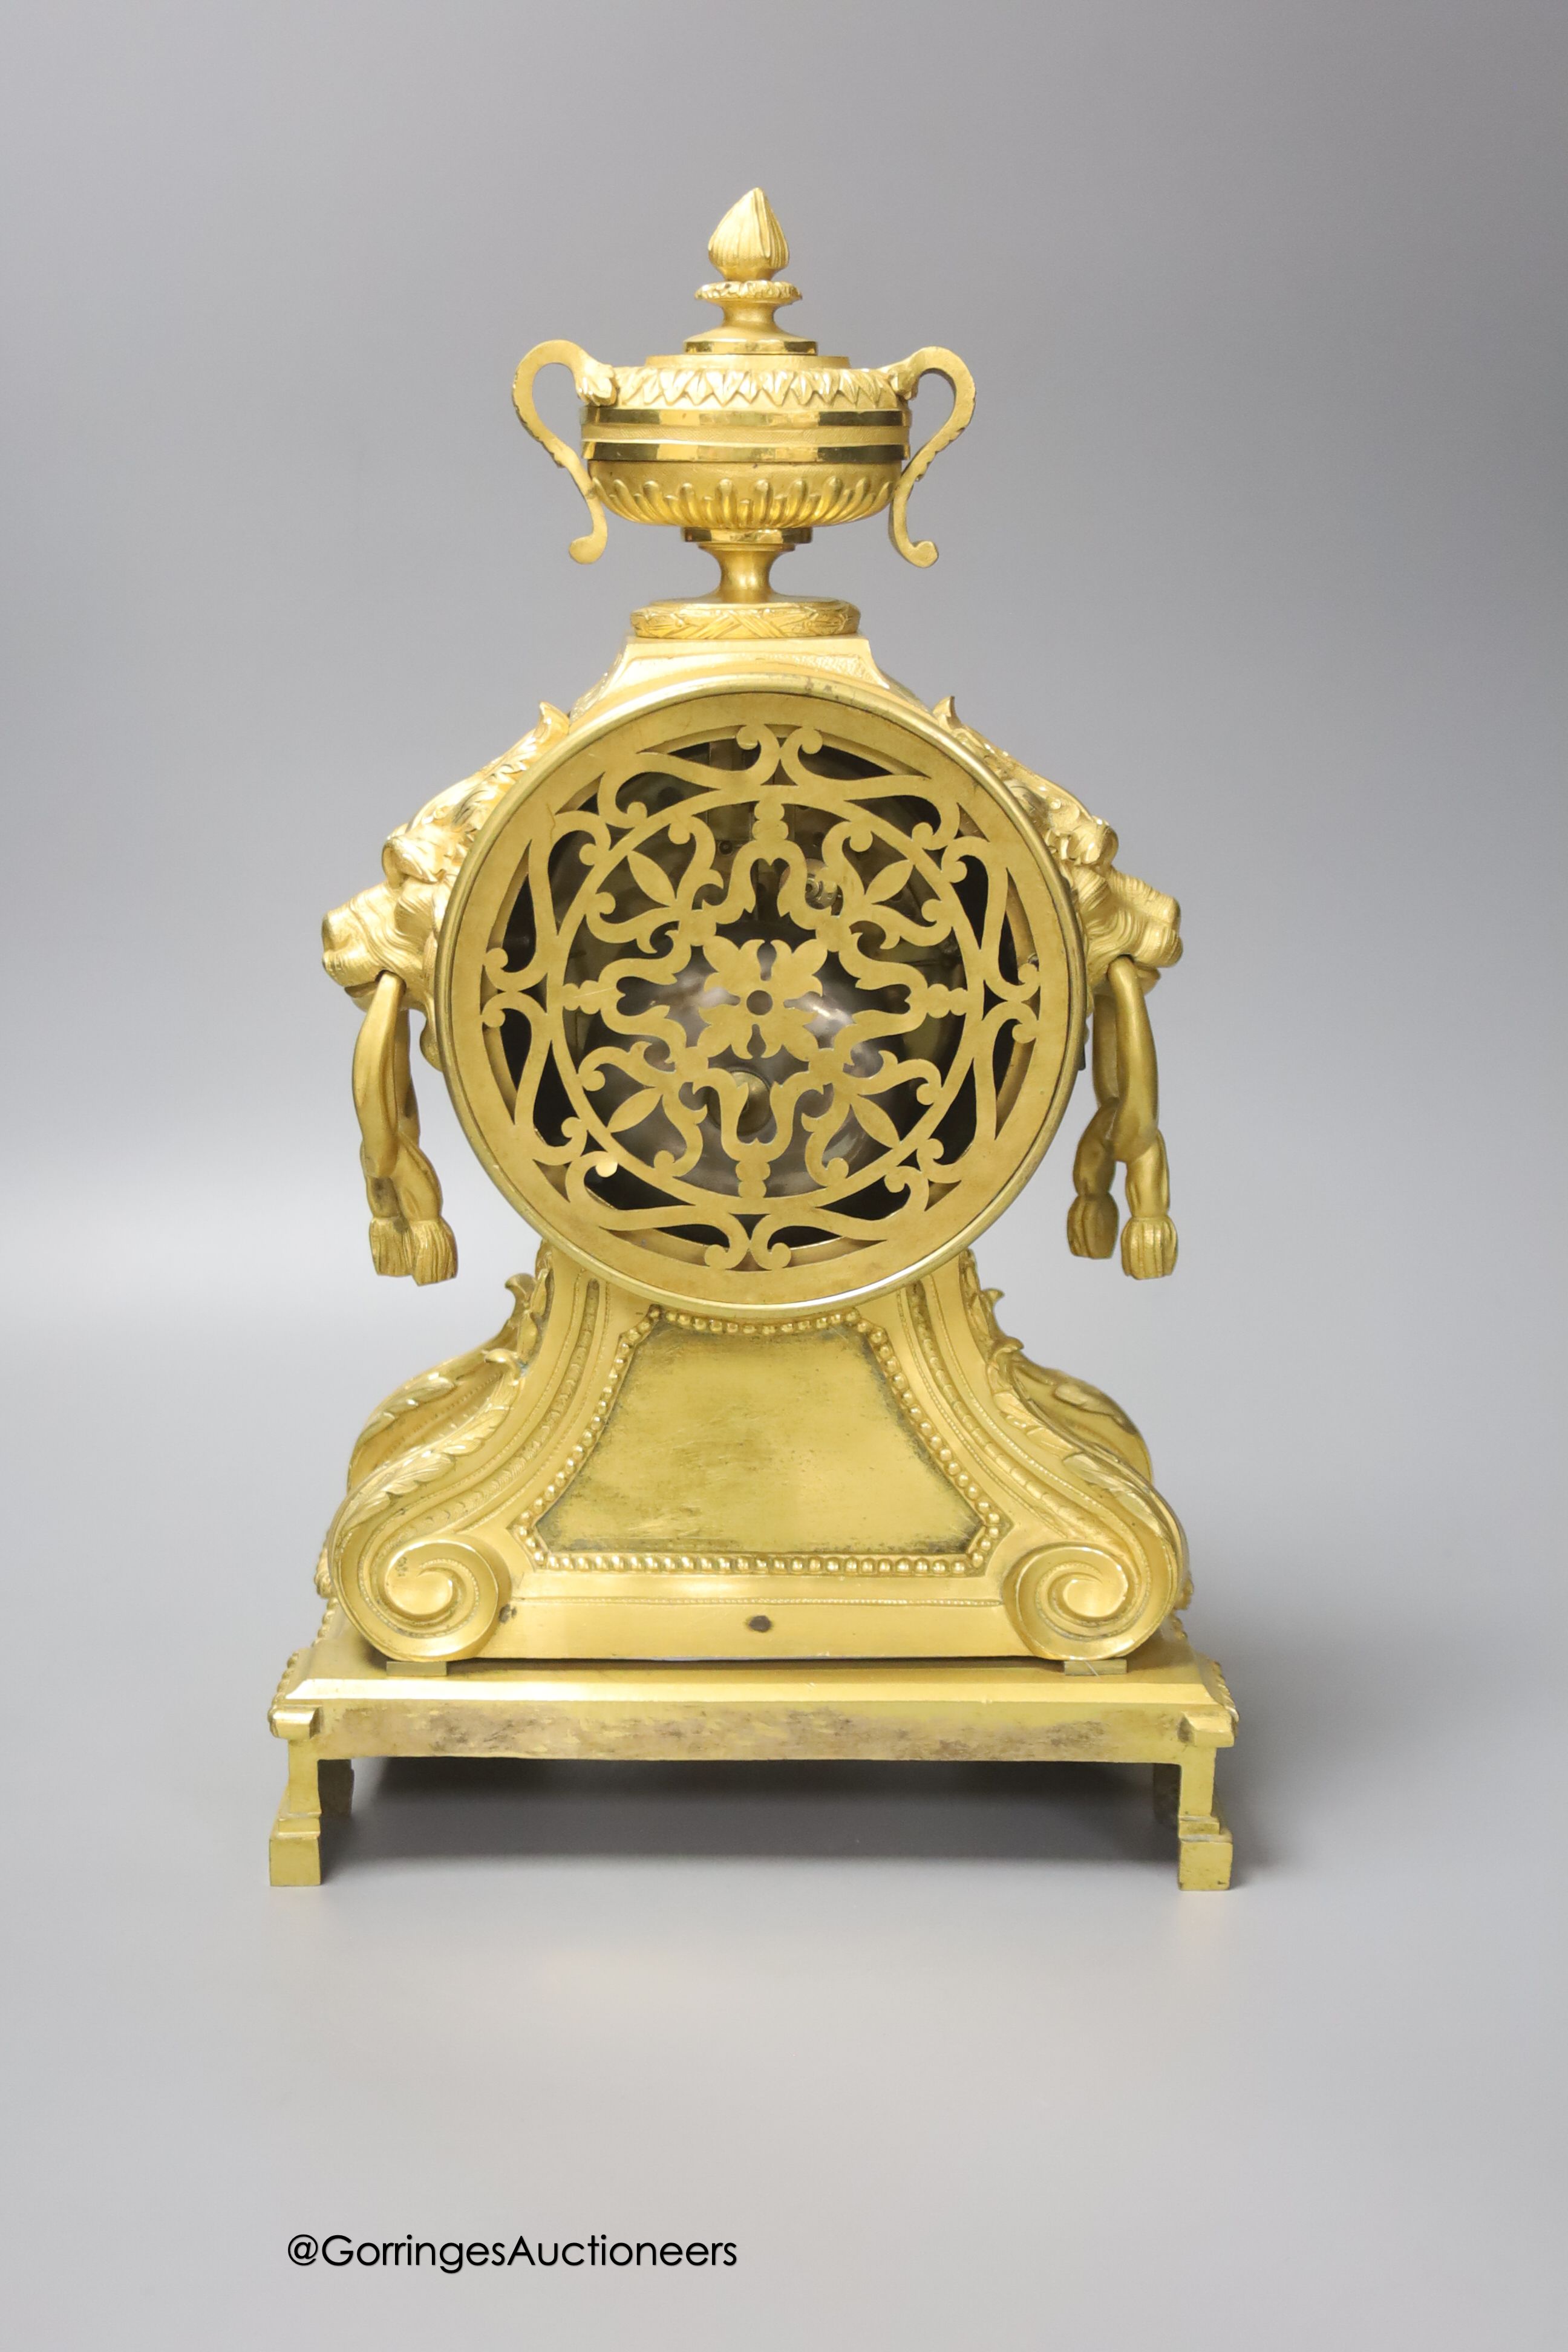 A 19th century French ormolu clock, with lion mask ring handles, 34cm